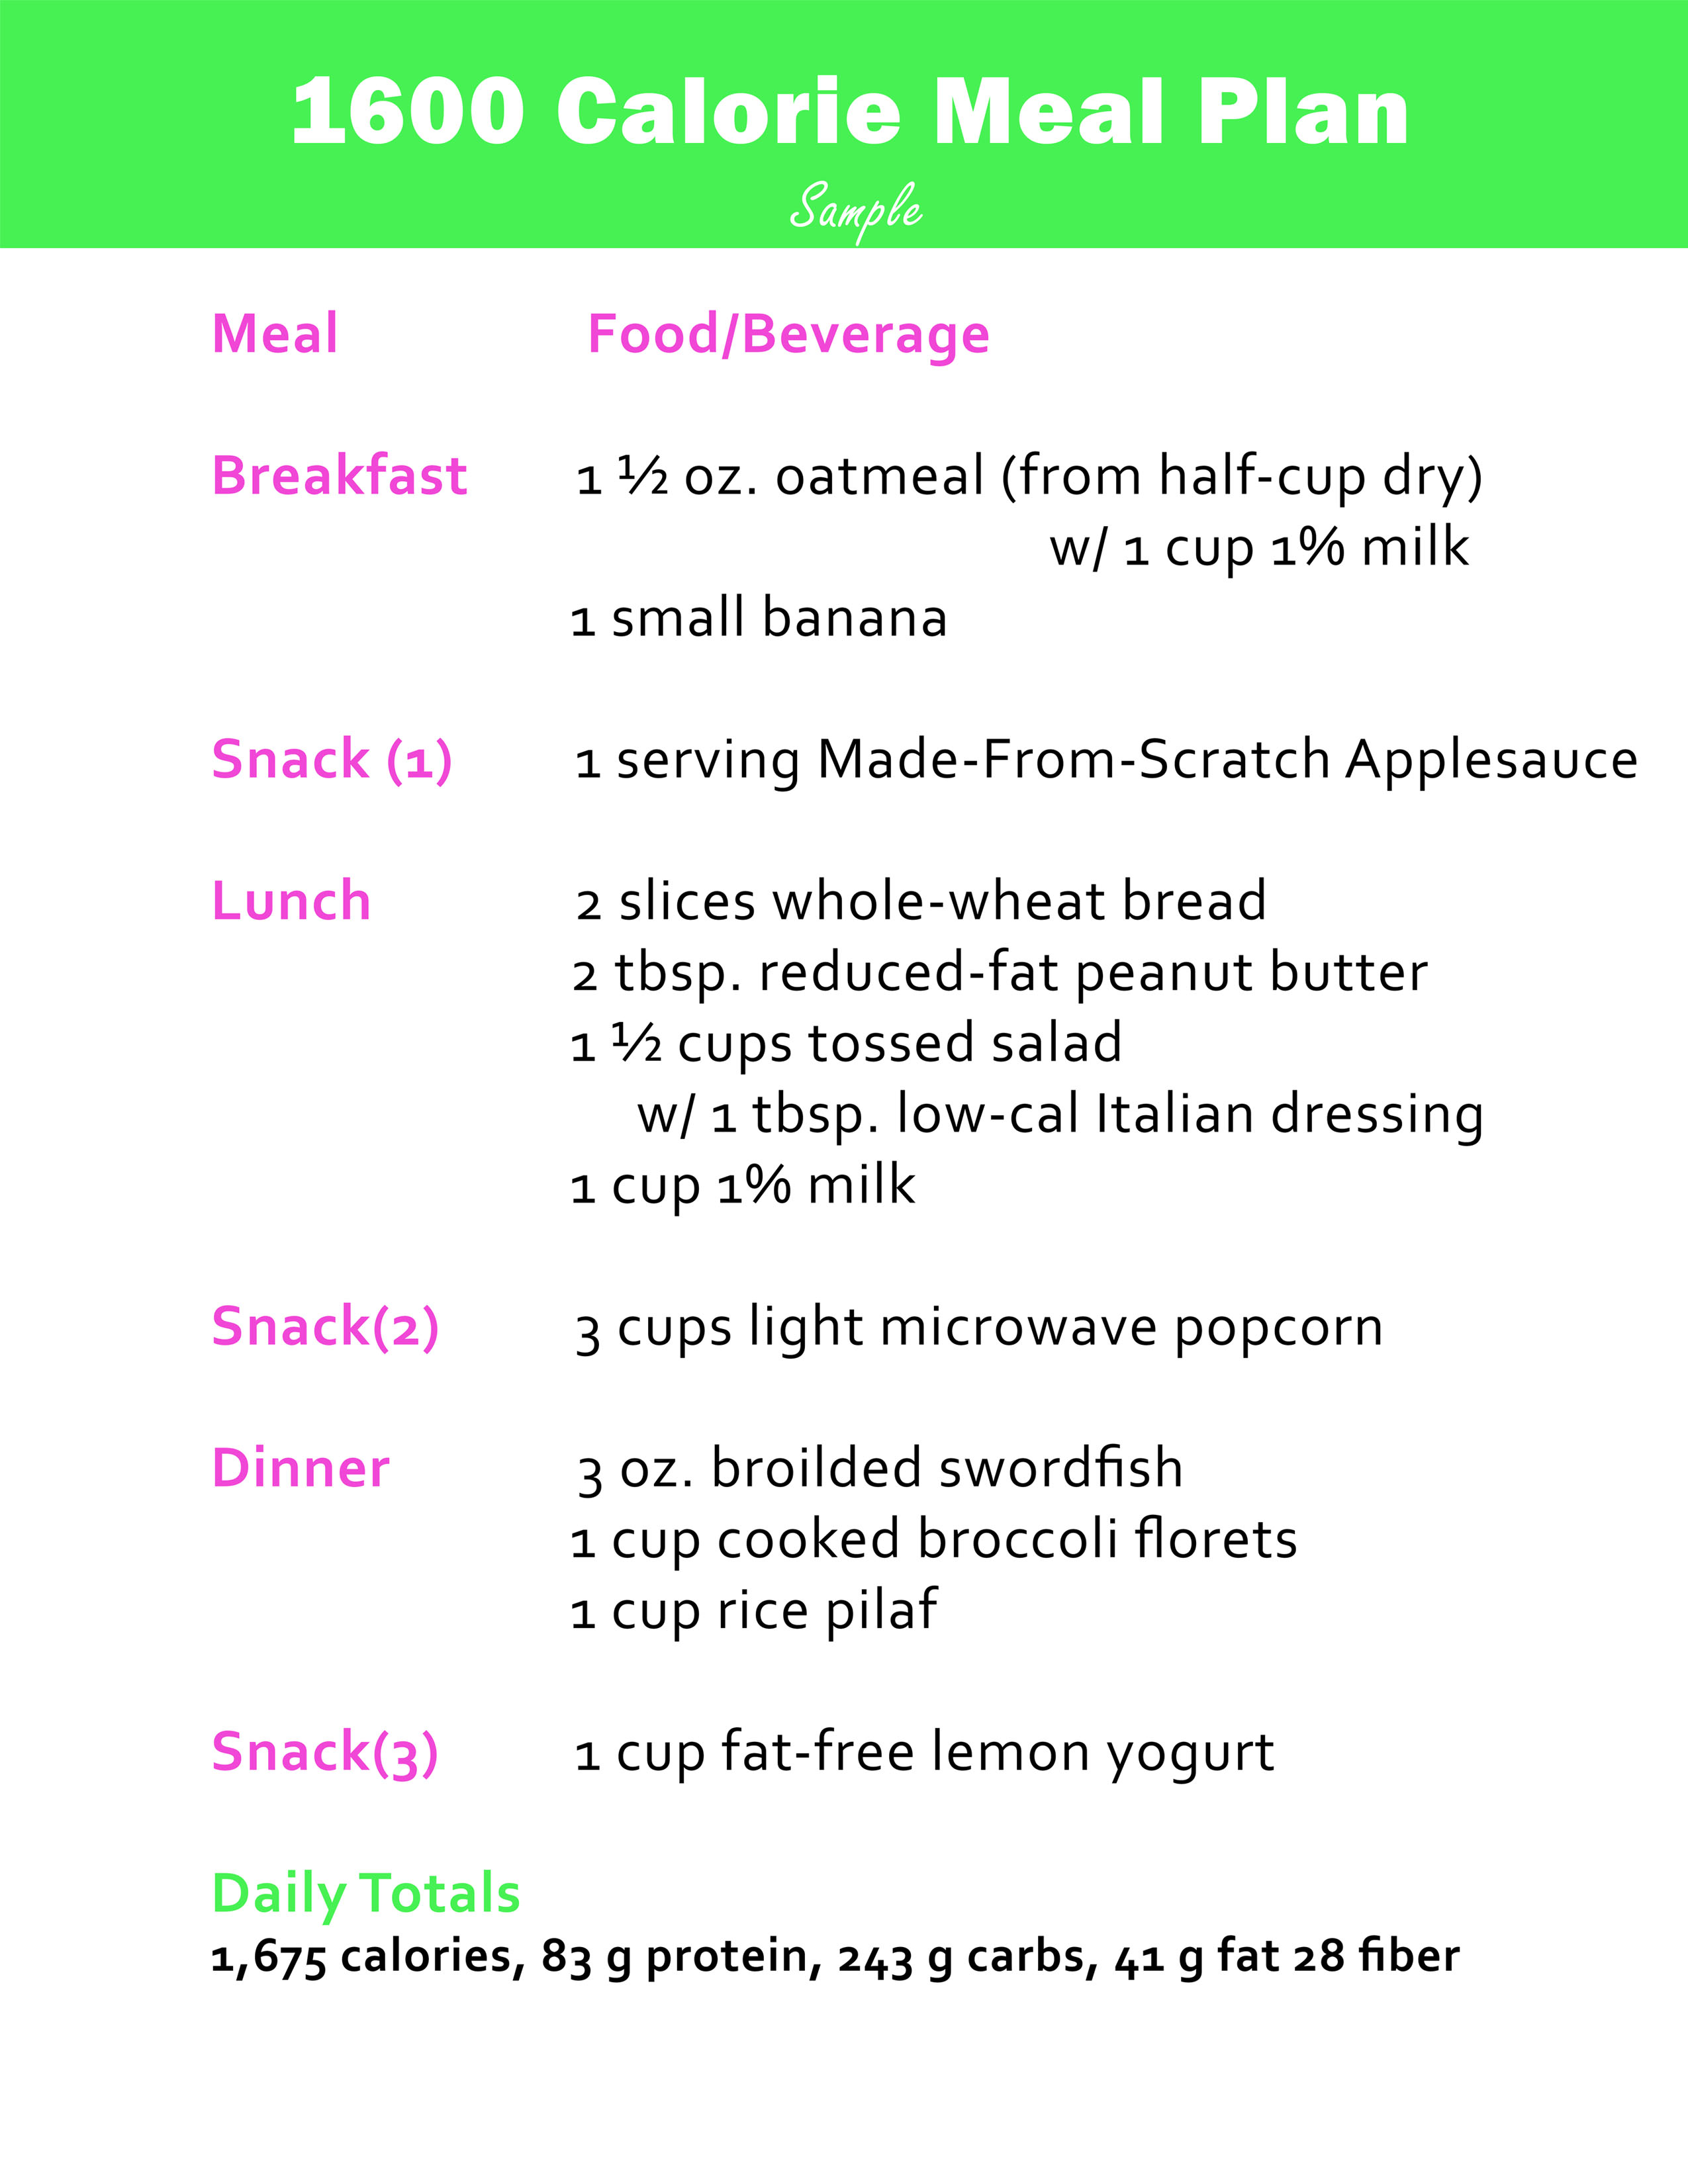 1600 calorie meal plan you can download and print.